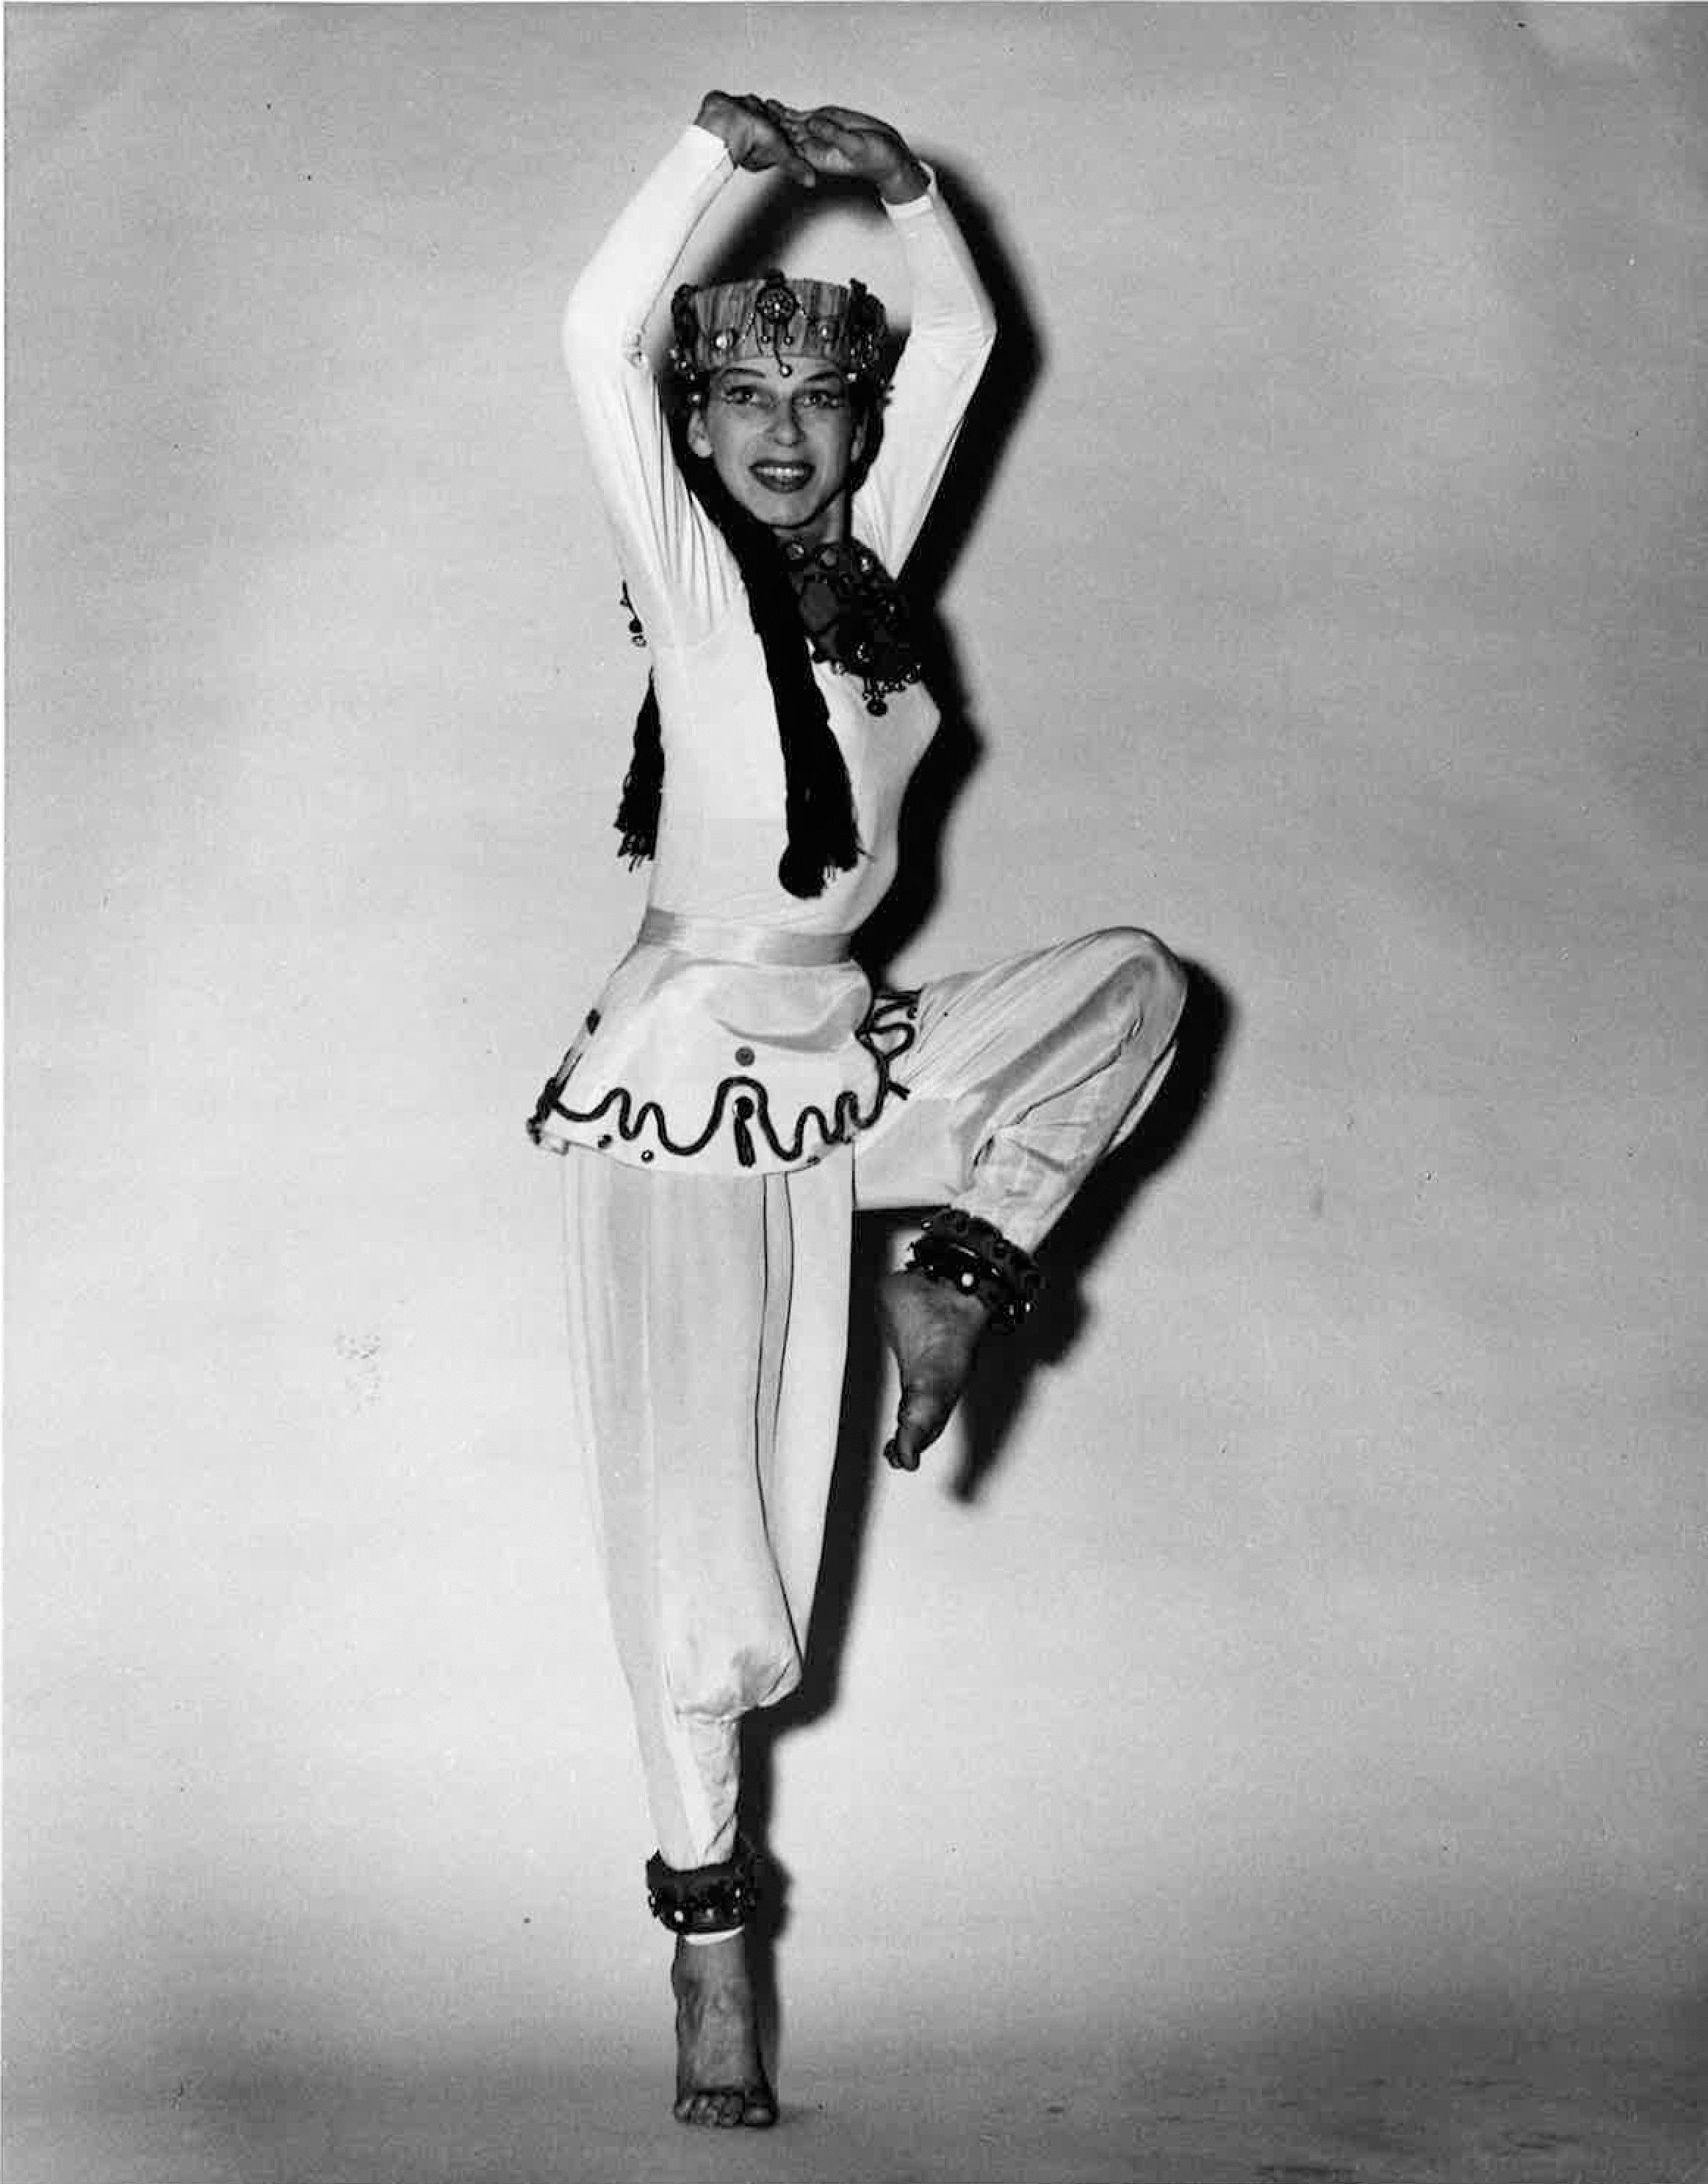 A barefoot Anna Halprin grins past the camera as she balances on relevu00e9 on one foot, the other leg raised to 90 degrees and bent at the knee and slightly turned out as her arms stretch overhead, fingers clasped.